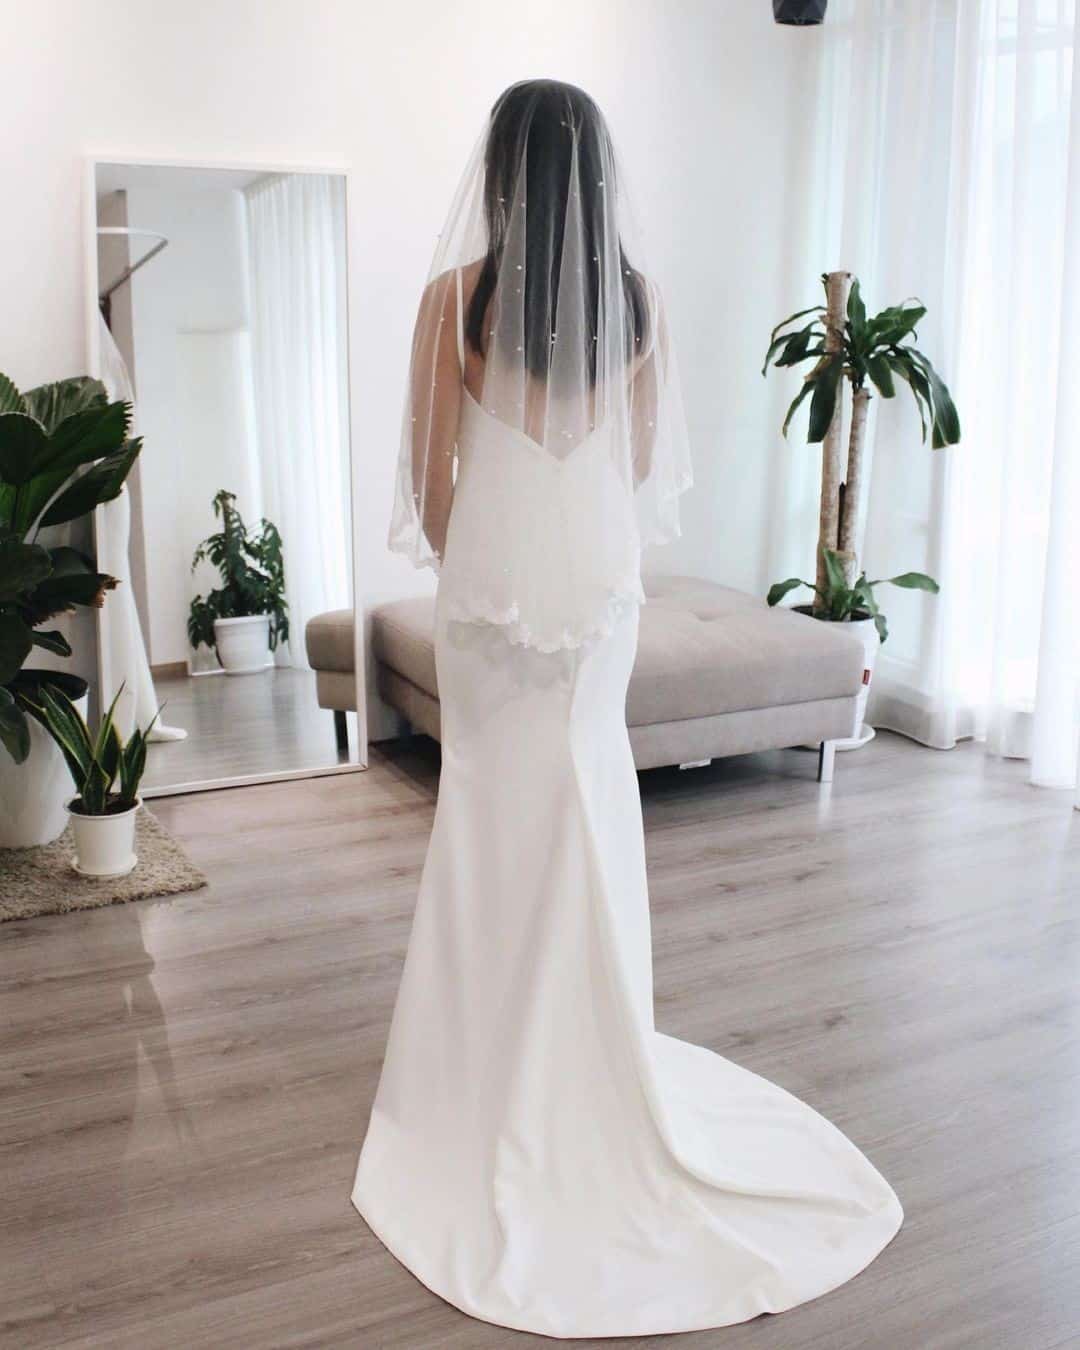 Straight & Long Wedding Hairstyle With Veil